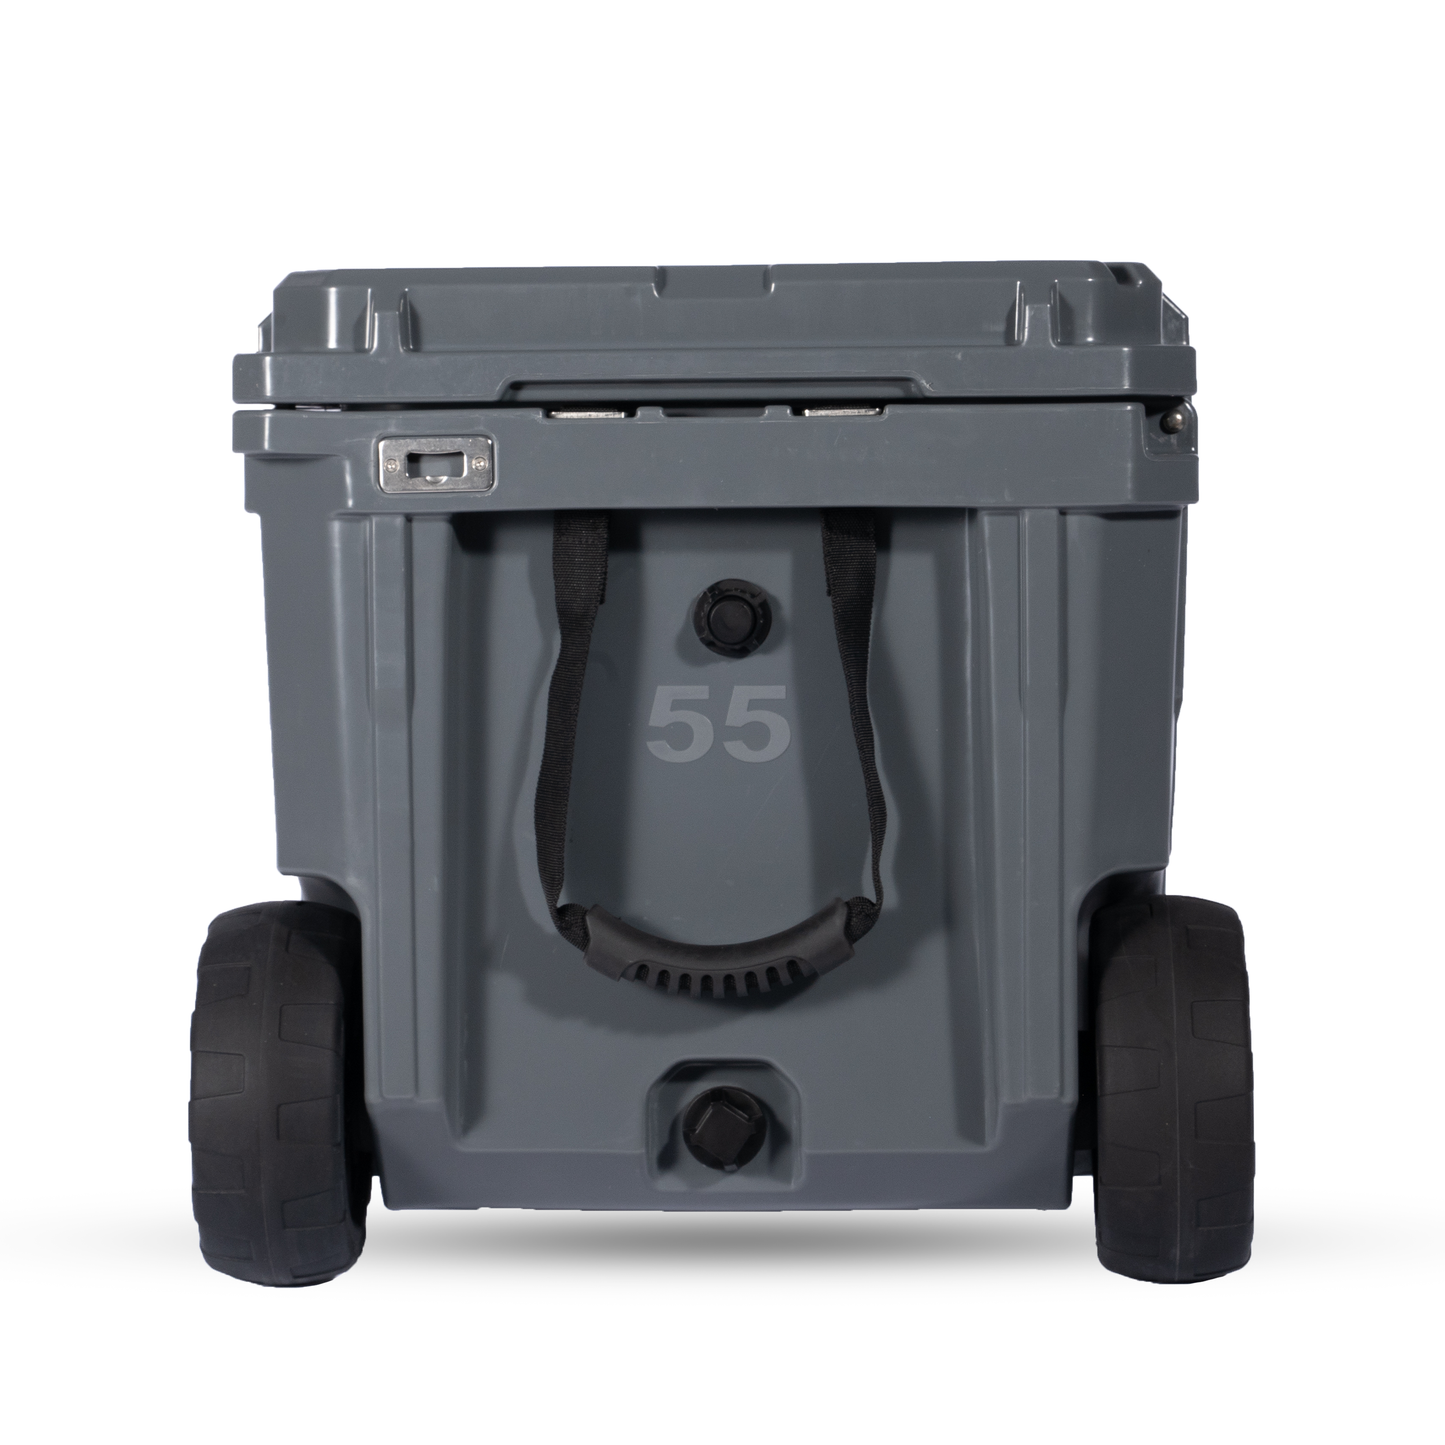 55QT Rolling Rugged Cooler by ROAM Adventure Co.